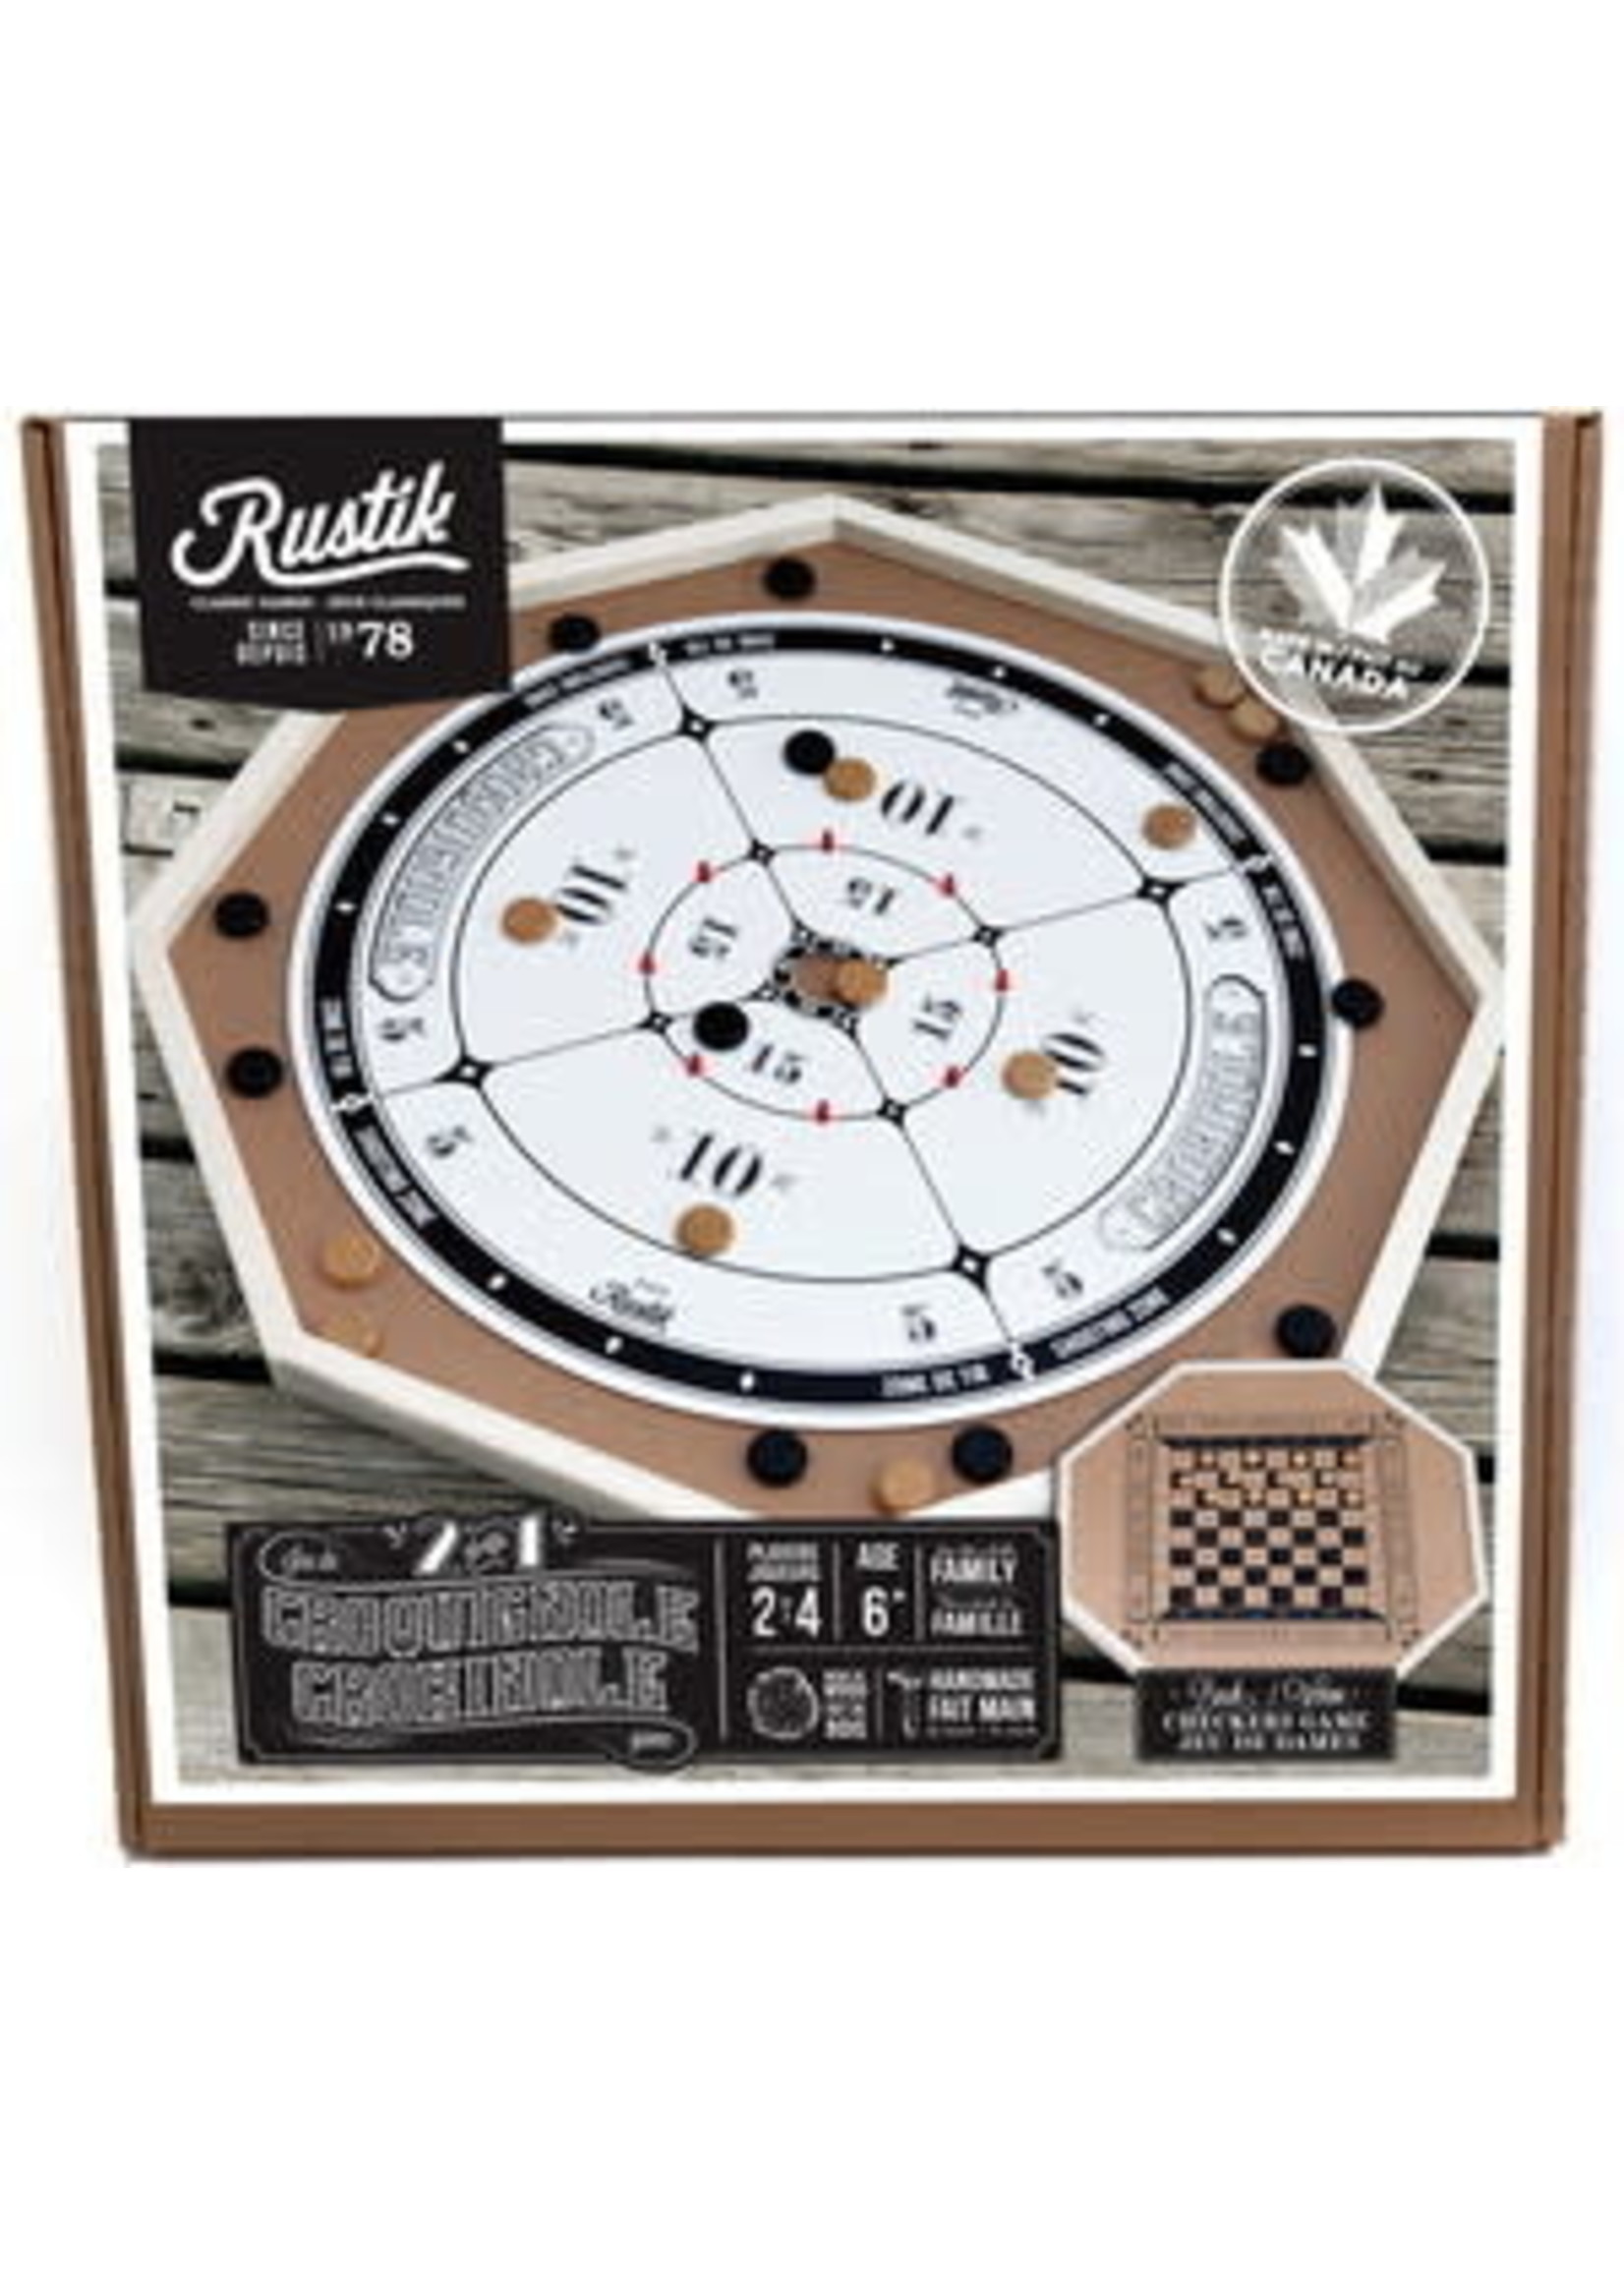 Rustik Crokinole/French checkers 2 in 1